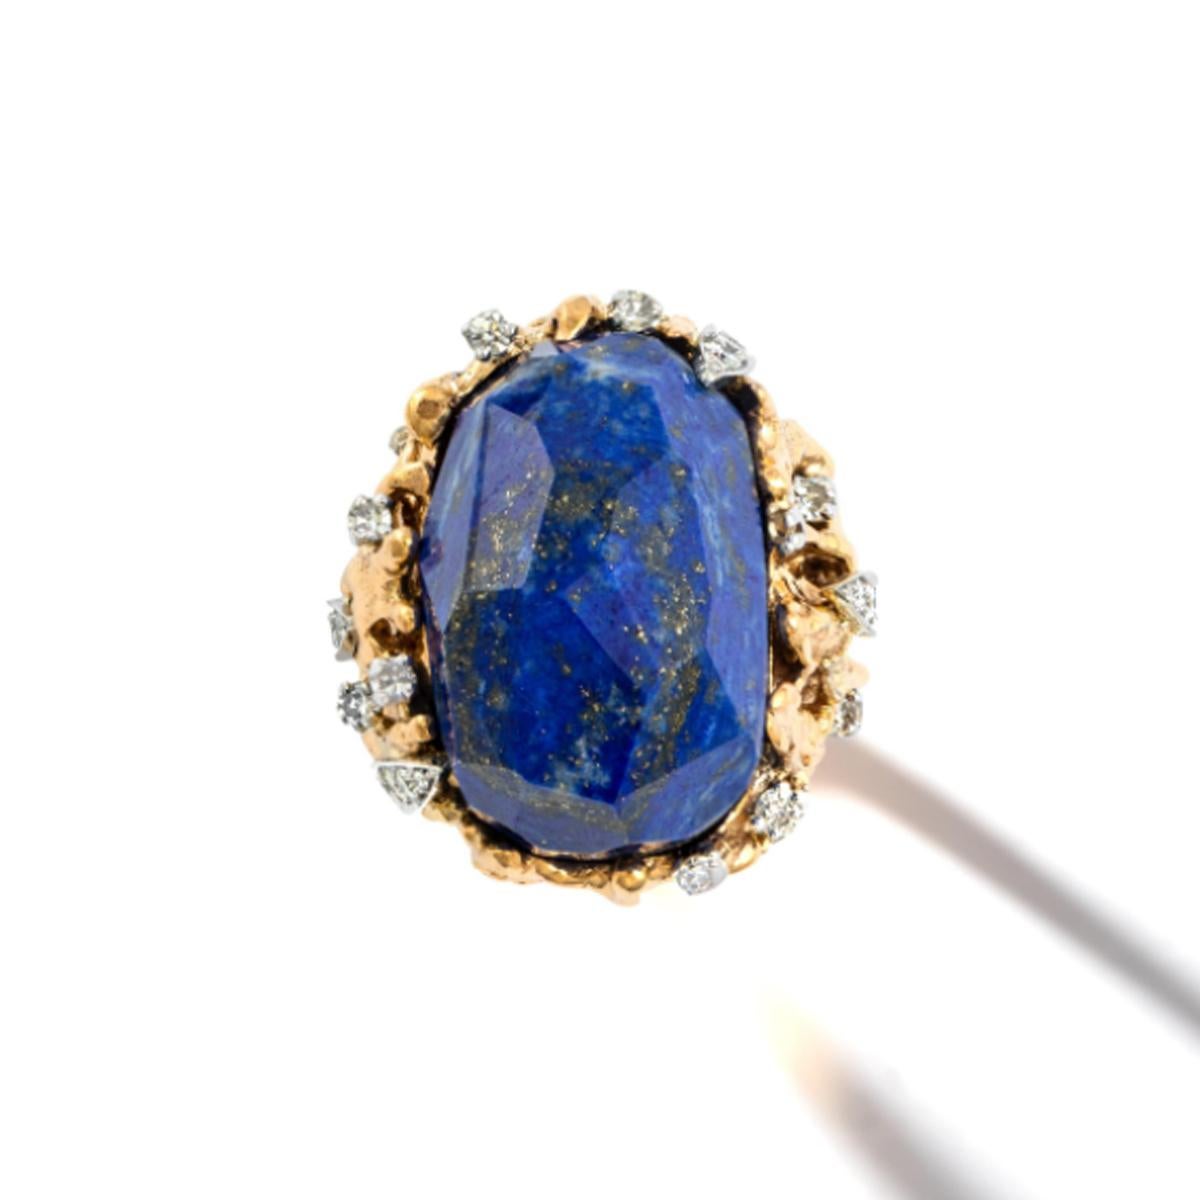 Lapis Lazuli and Diamond yellow gold Ring.
Incredibly designed holding an important raw cut Lapis Lazuli surrounded by diamonds.
Unique piece. Mark 14k.
Circa 1970.

Size 8 (57).
Height on top part: 0.79 inch (2.00 centimeters)
Length on finger top